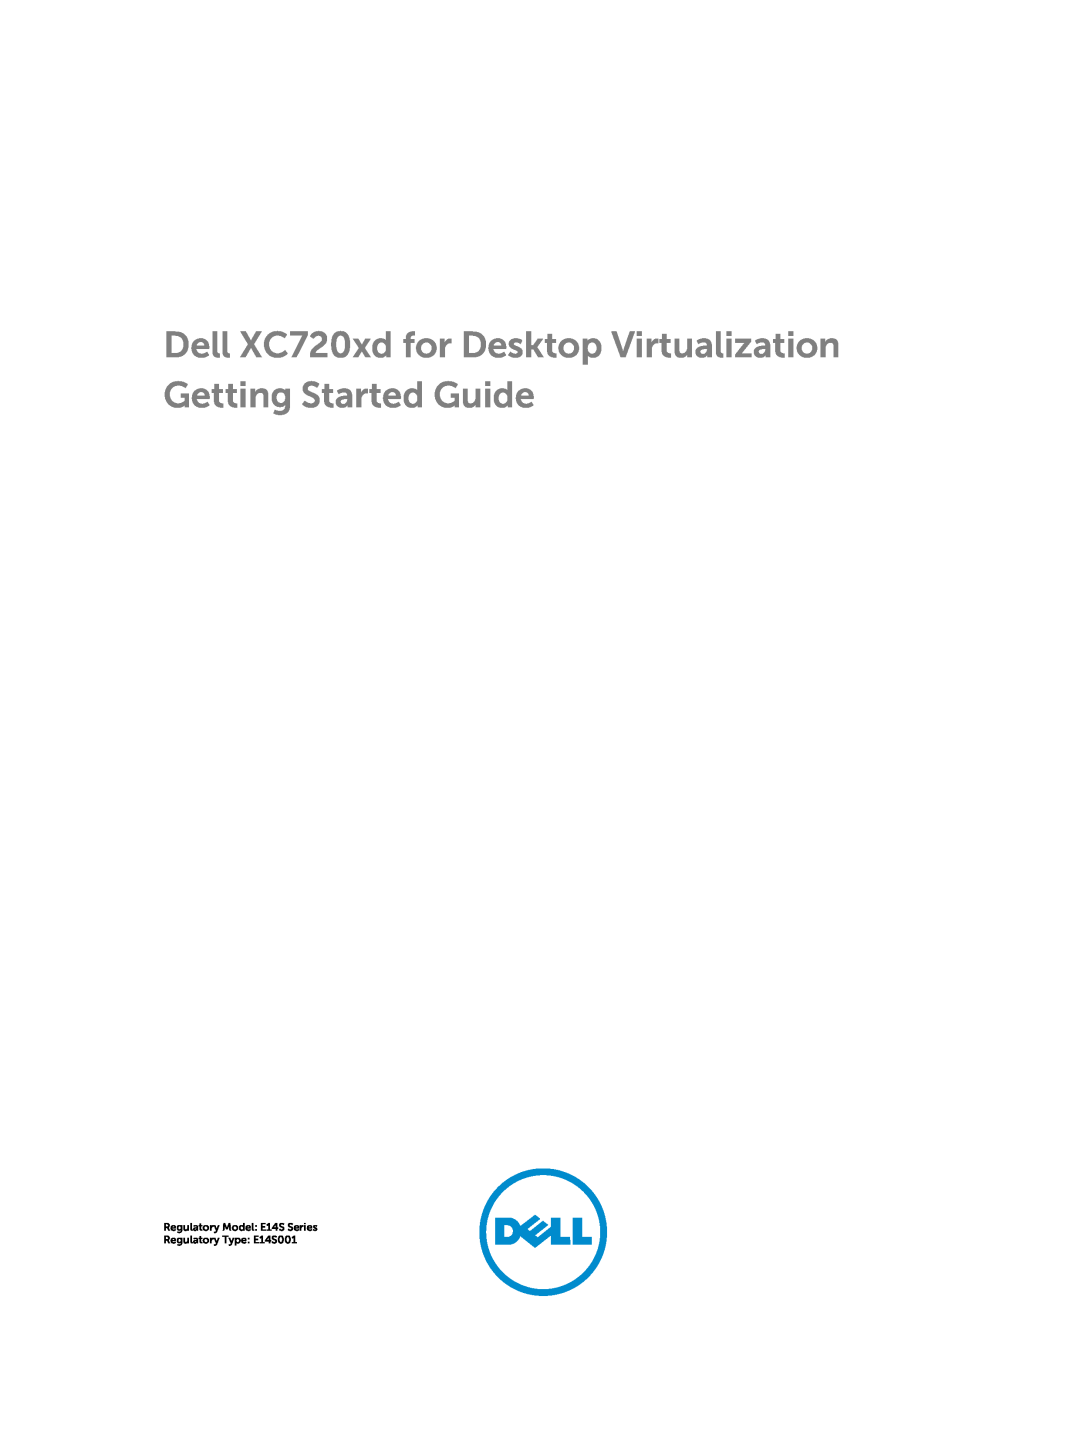 Dell E14S Series manual Dell XC720xd for Desktop Virtualization Getting Started Guide 